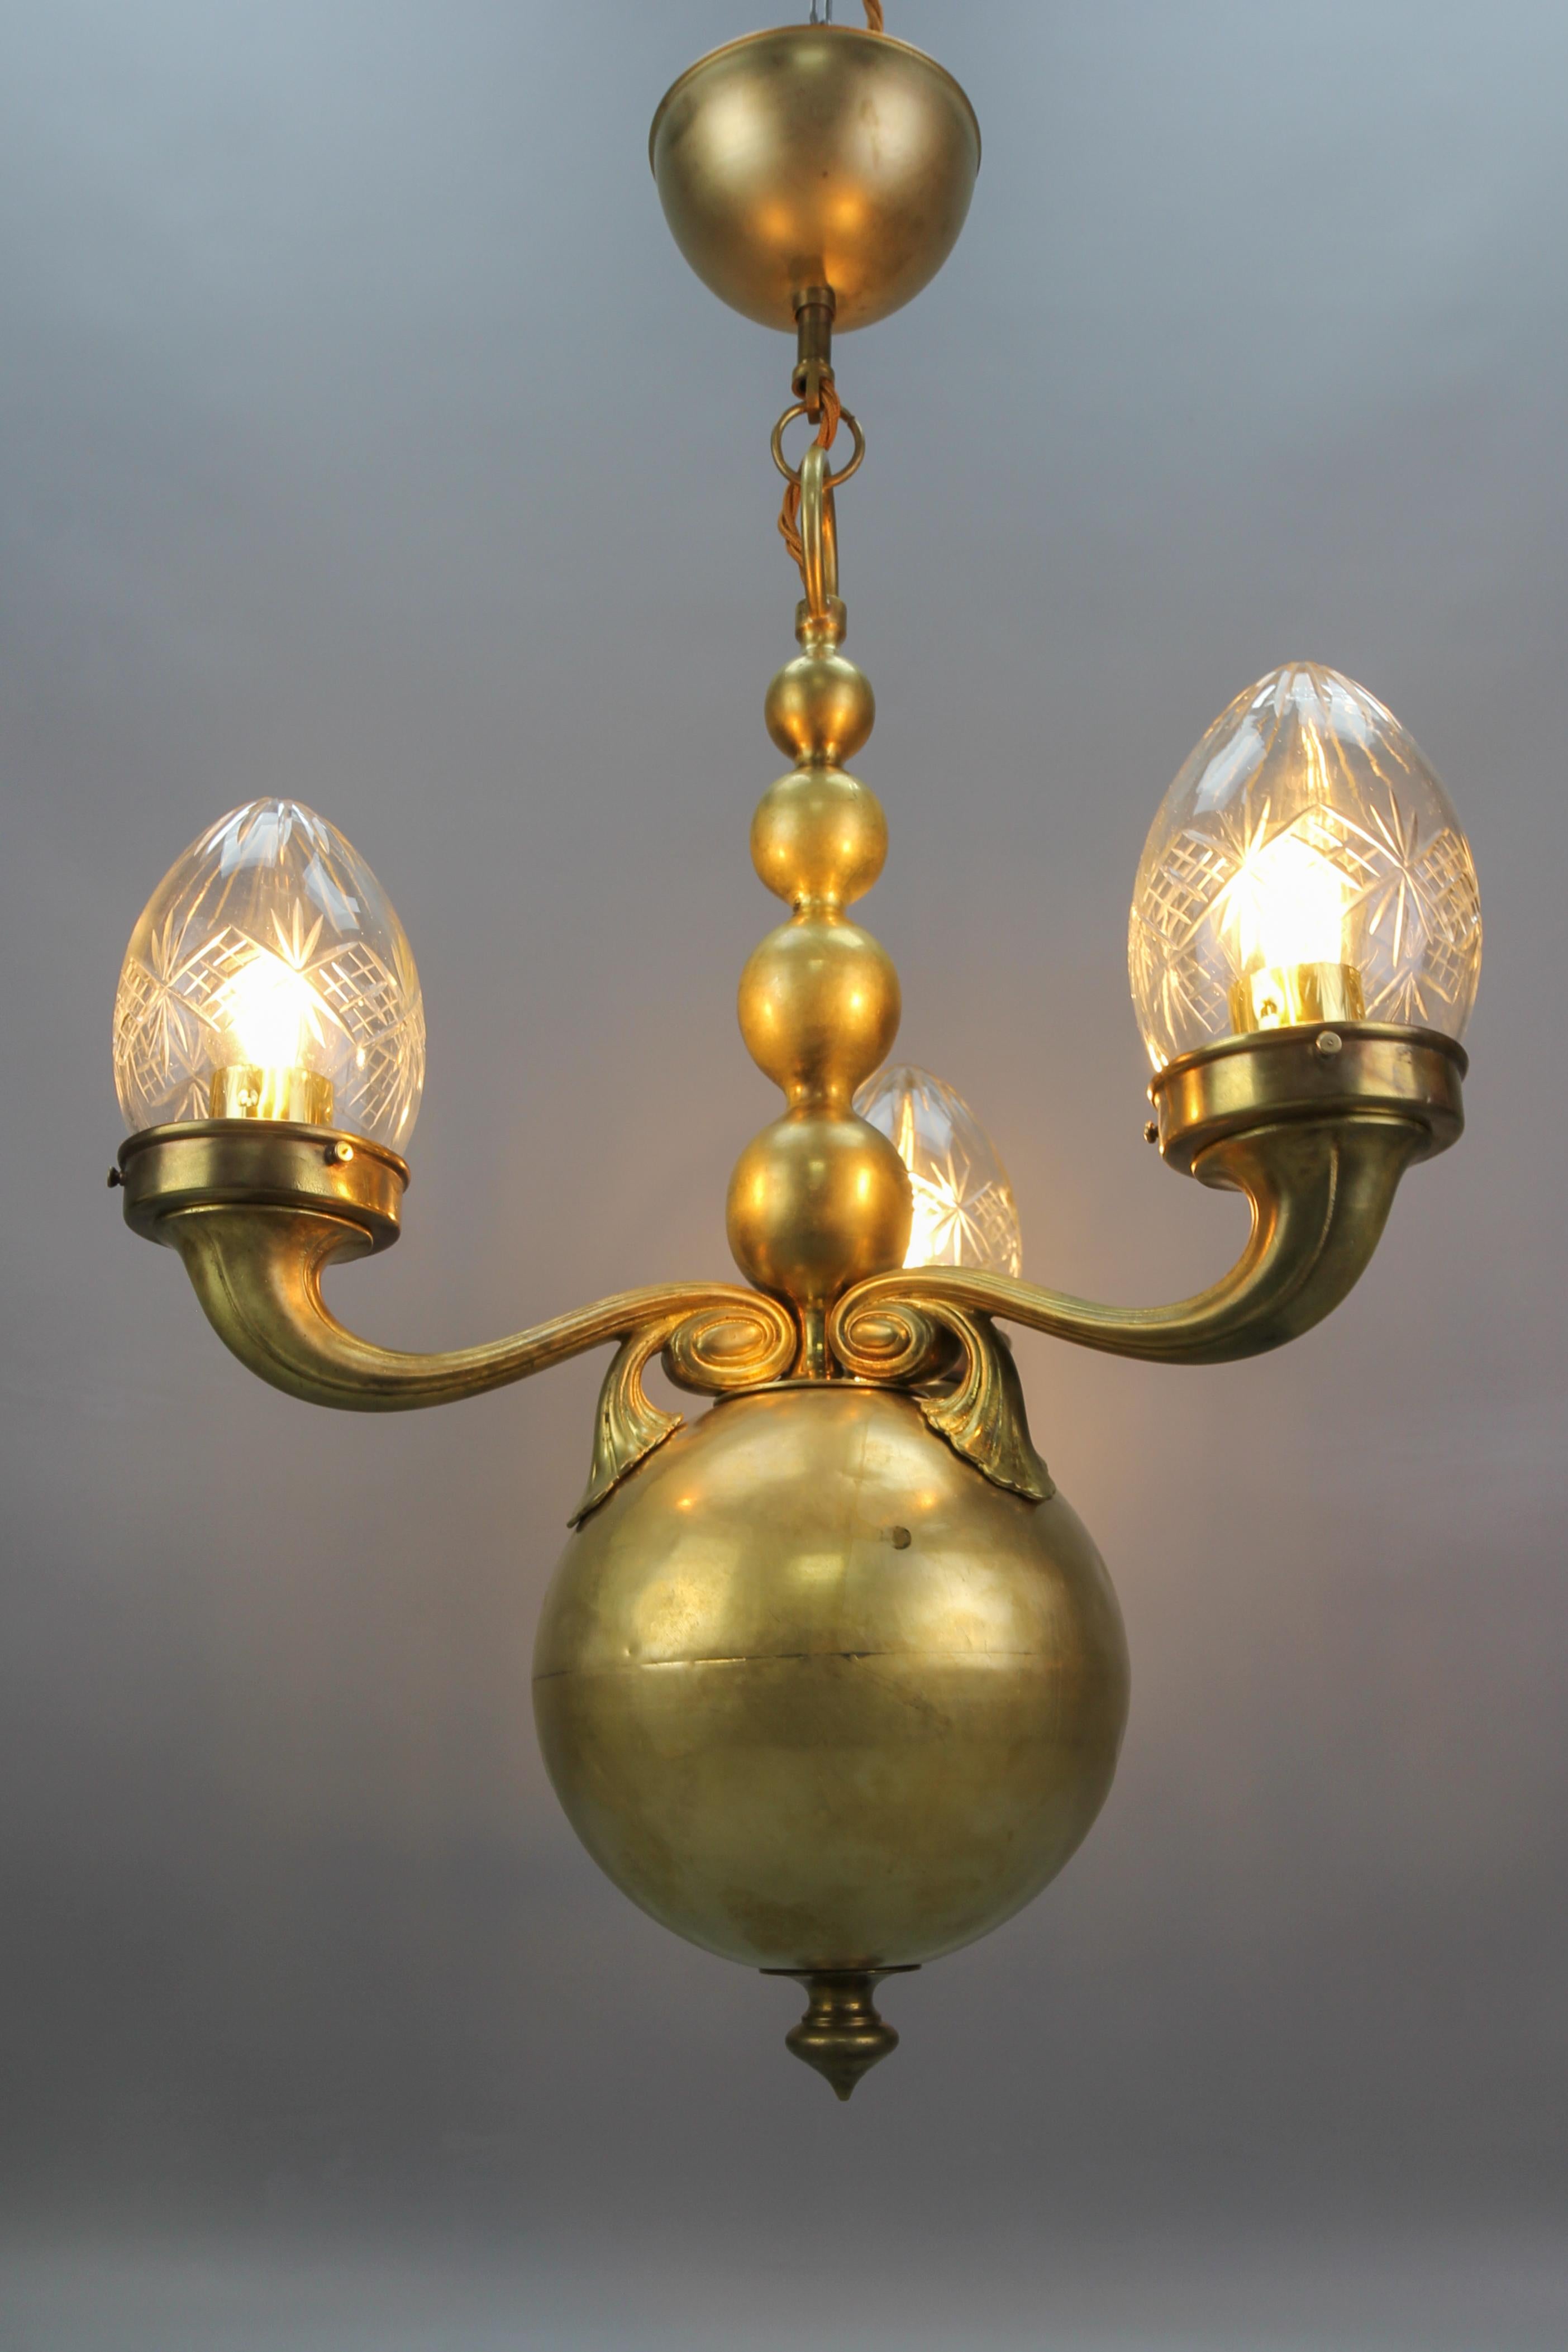 French brass and clear, cut glass three-light chandelier from the early 20th century.
An impressive and elegant three-arm chandelier made of brass. Each arm with an oviform clear, cut glass lampshade and a socket for an E27 (E26) size light